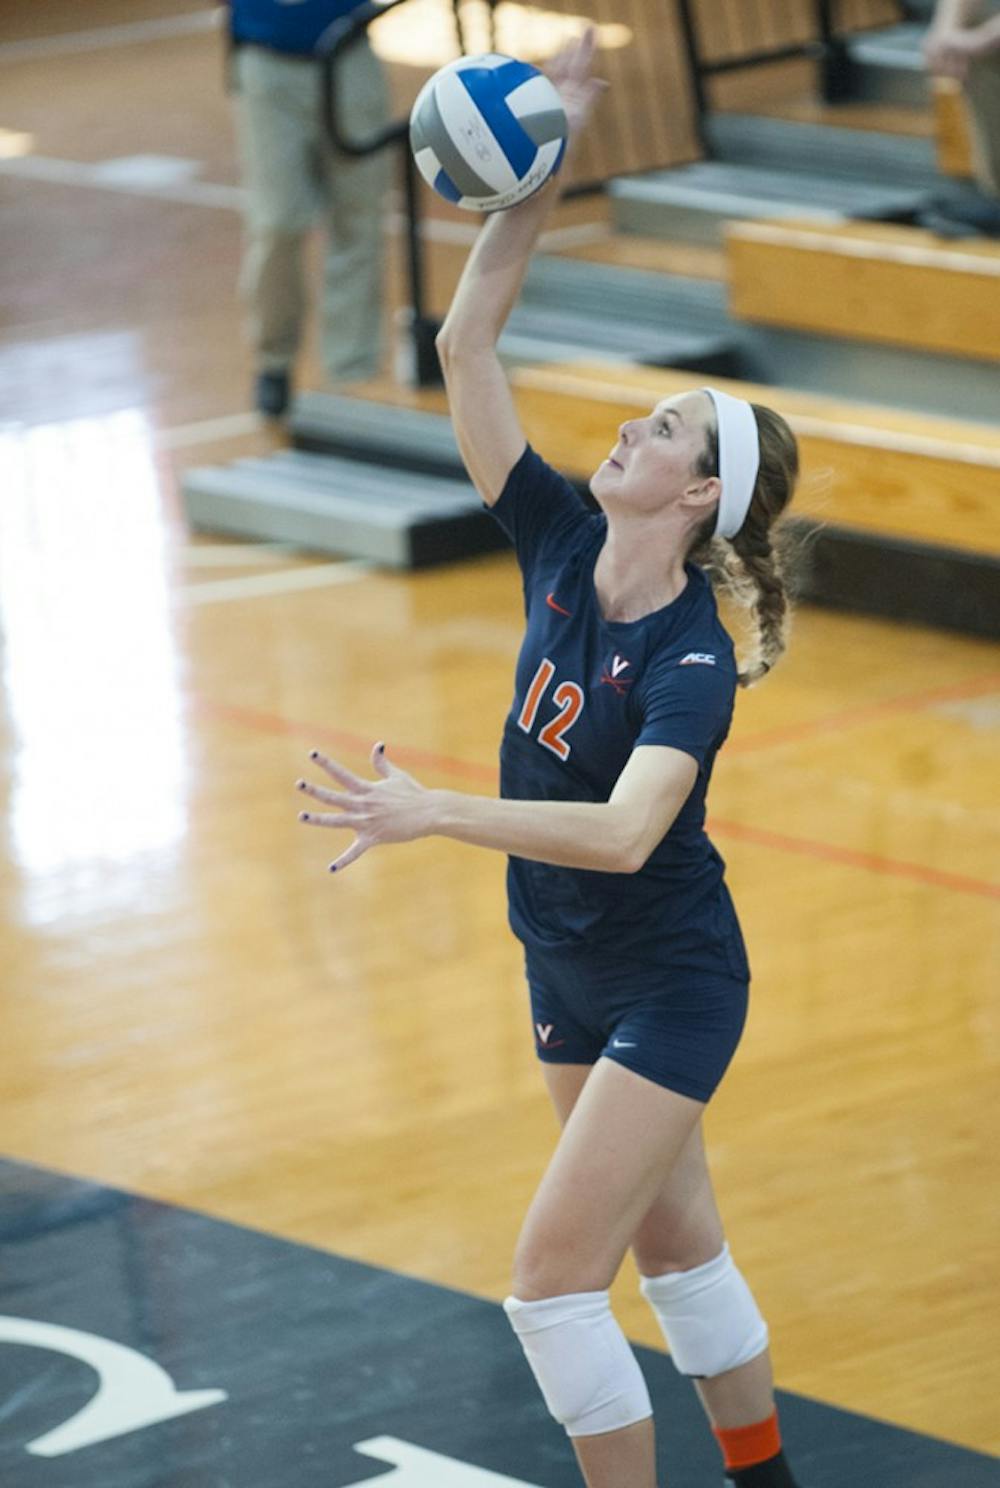 <p>With her 14-kill, 12-dig, 11-block performance against the Crimson Tide, senior middle hitter Natalie Bausback became the first Cavalier to record a triple-double since Tori Janowski in 2012. </p>